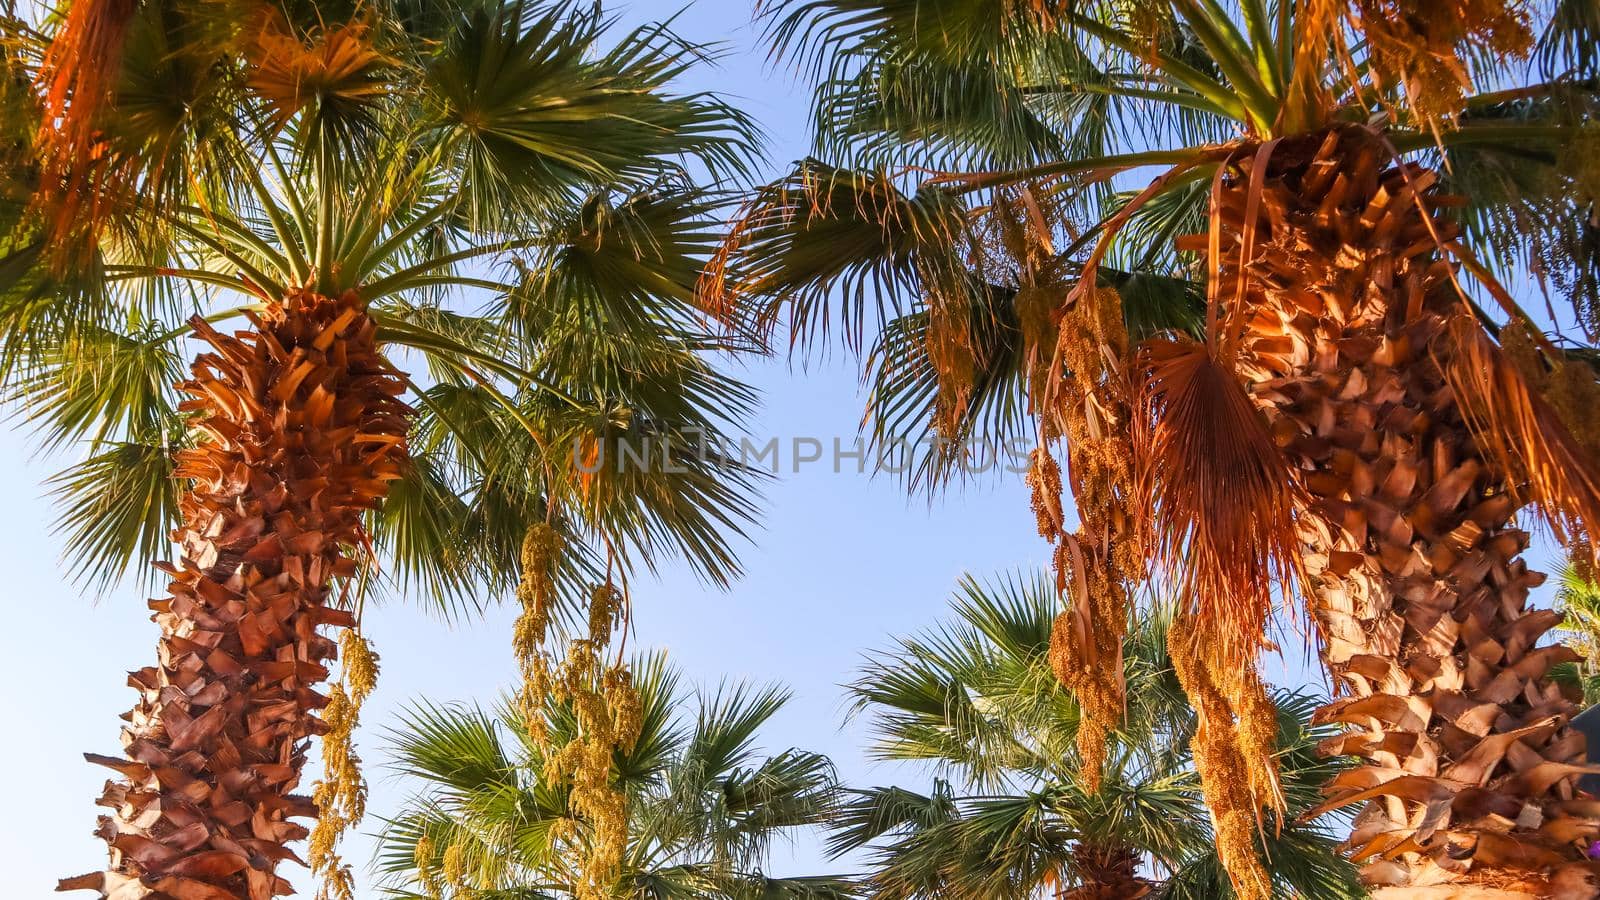 Finik Palms (Date palms) against the blue sky in sunset